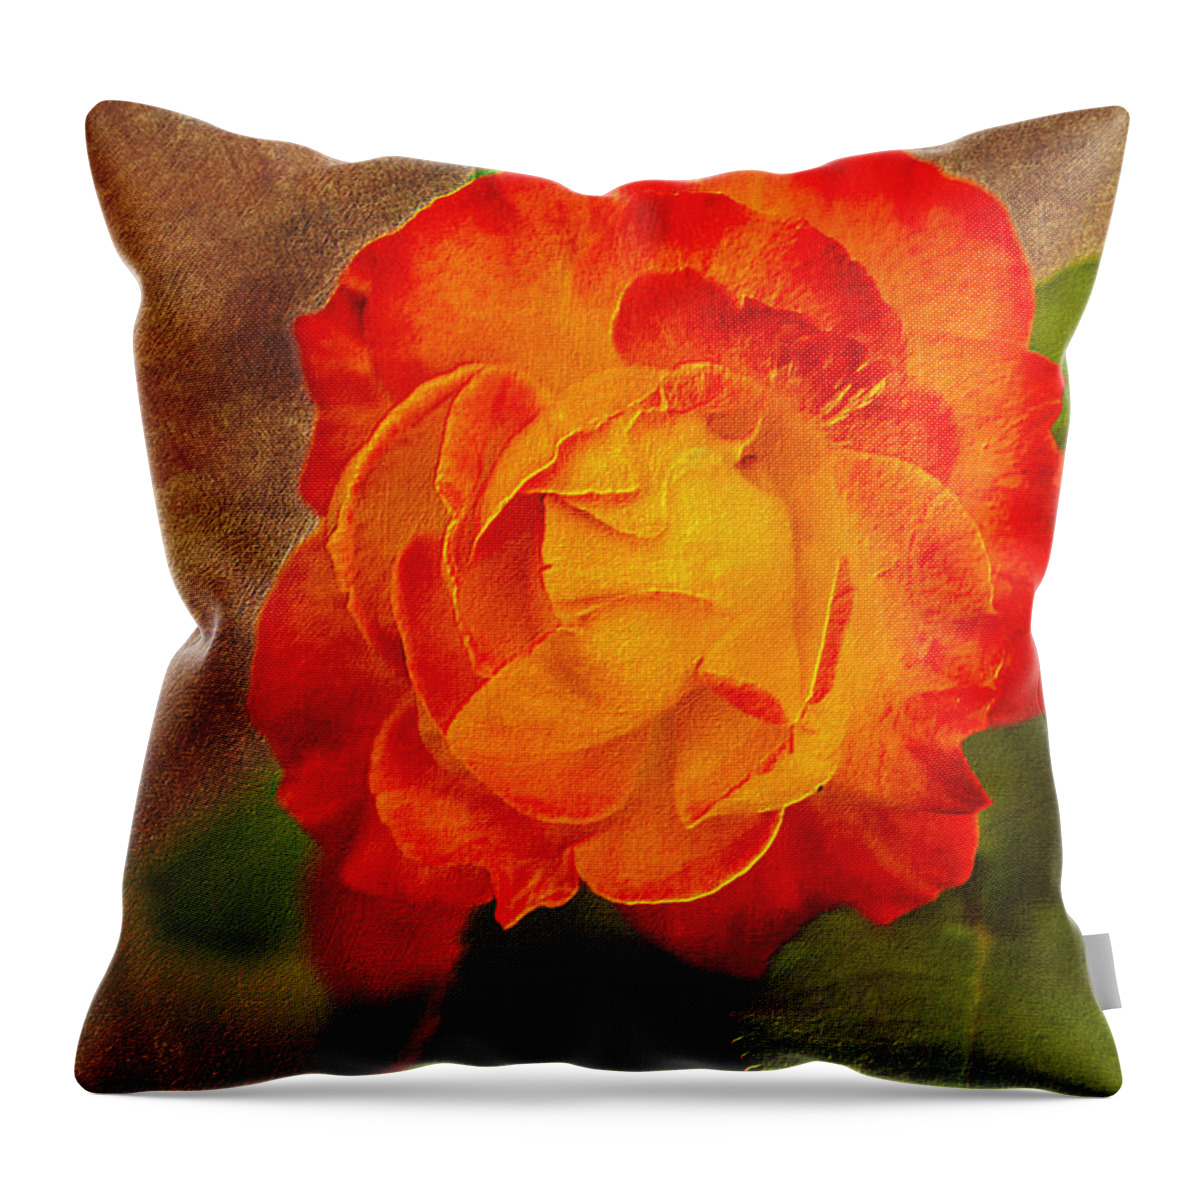 Variegated Throw Pillow featuring the photograph Variegated Beauty - Rose Floral by Barry Jones